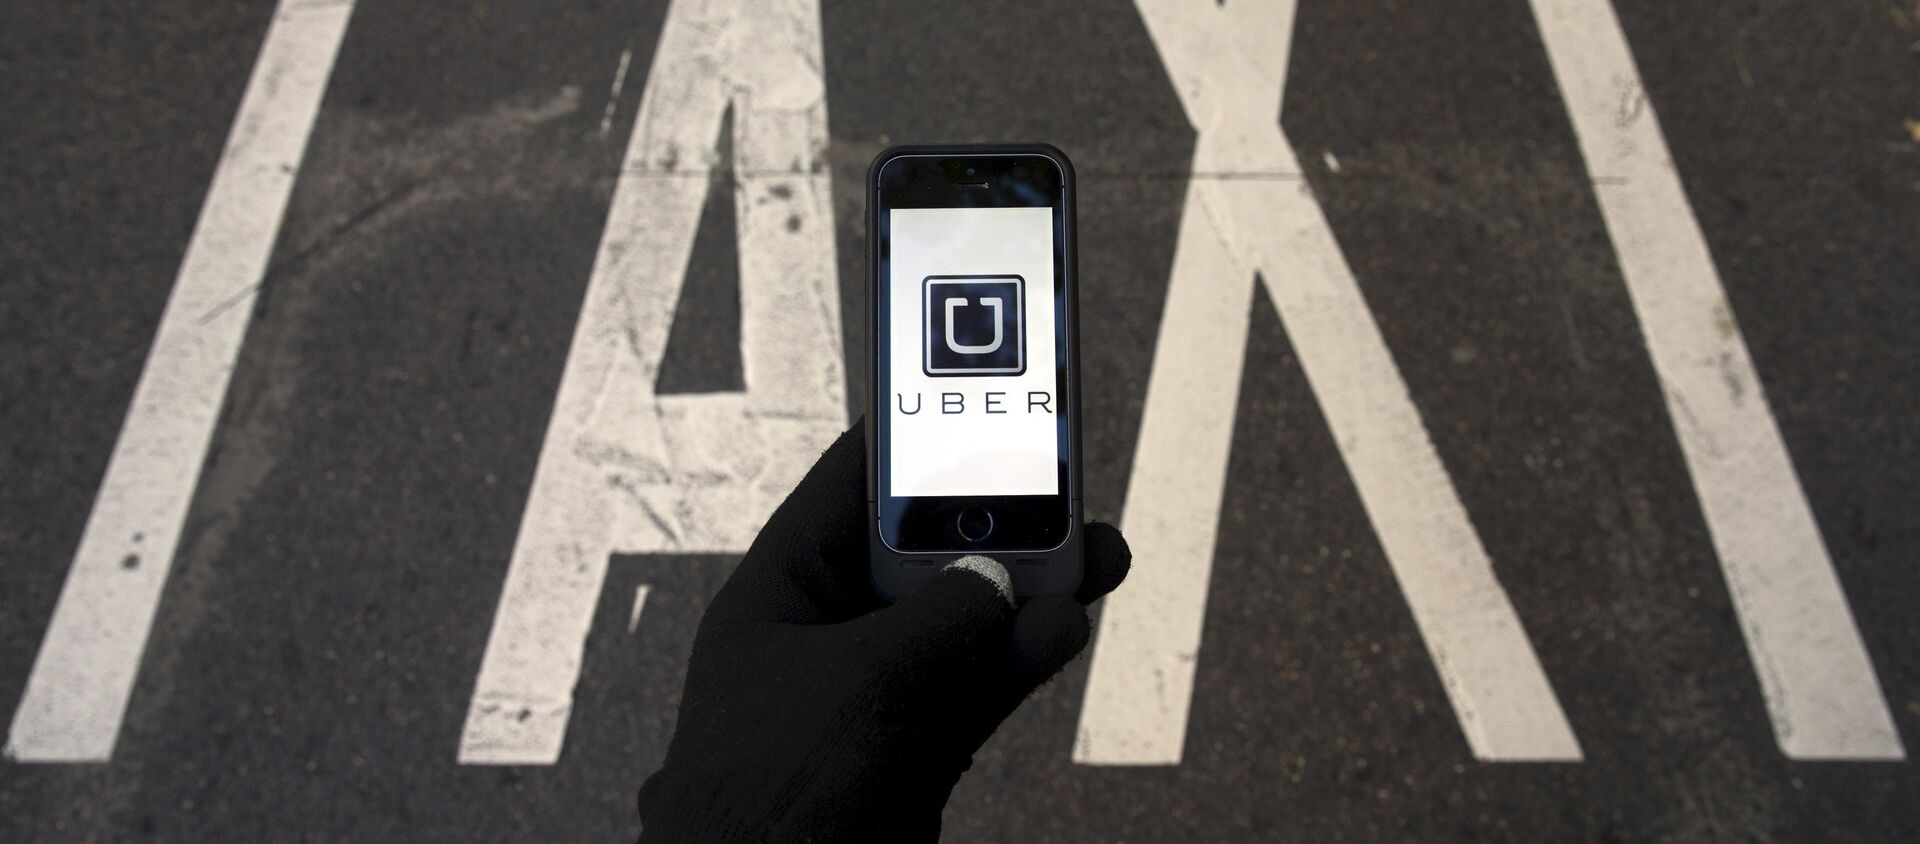 The logo of car-sharing service app Uber on a smartphone over a reserved lane for taxis in a street is seen in this file photo illustration taken in Madrid on December 10, 2014 - Sputnik Mundo, 1920, 02.02.2020